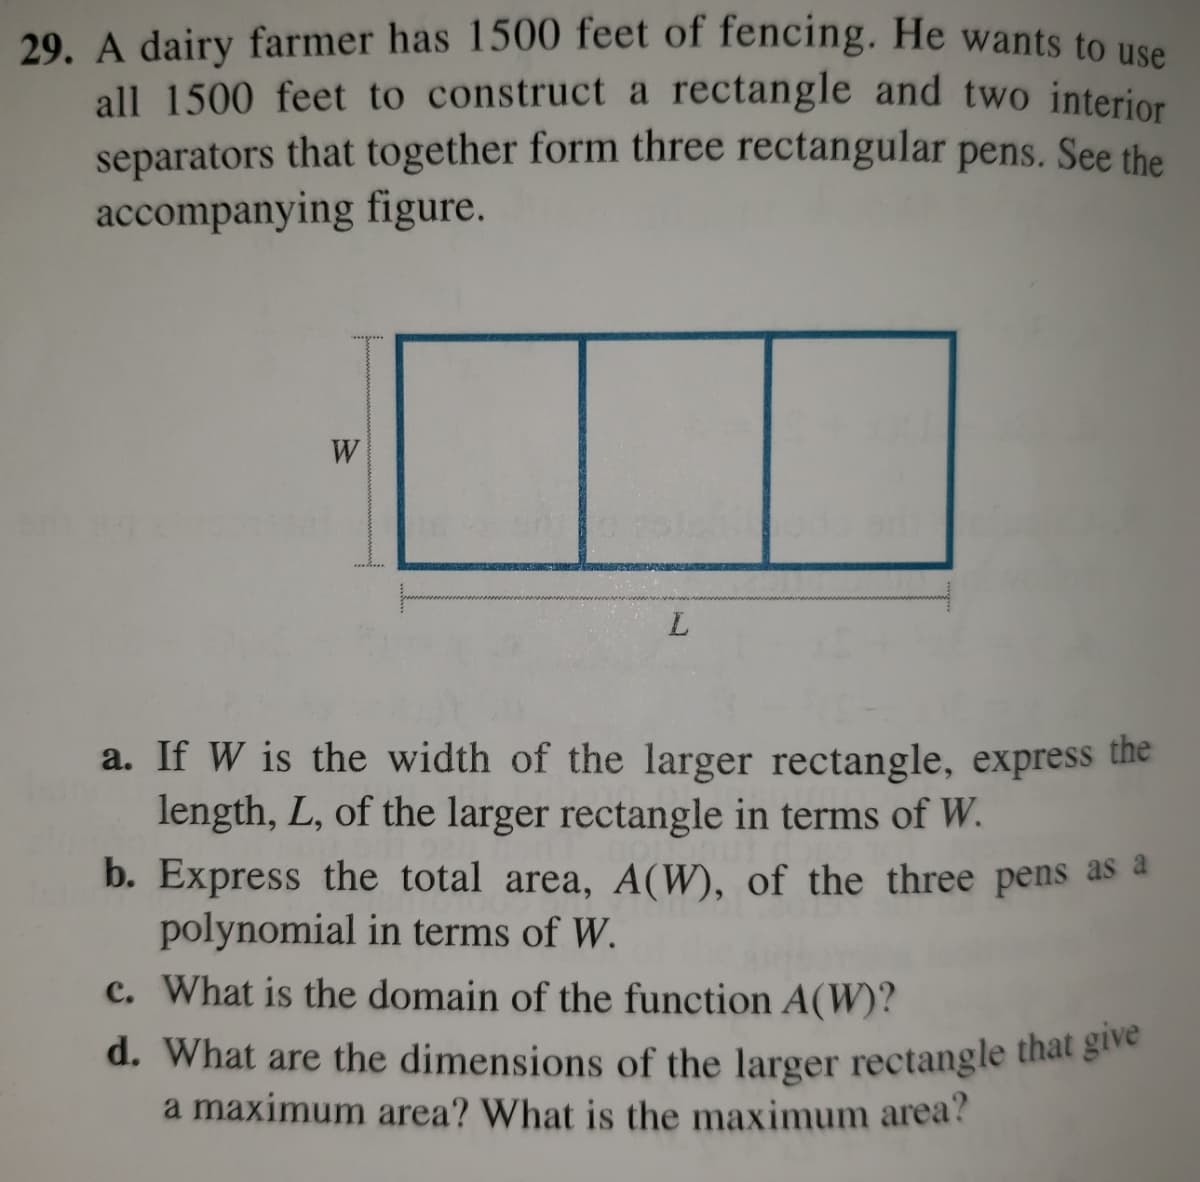 d. What are the dimensions of the larger rectangle that give
29. A dairy farmer has 1500 feet of fencing. He wants to use
all 1500 feet to construct a rectangle and two interior
separators that together form three rectangular pens. See the
accompanying figure.
W
a. If W is the width of the larger rectangle, express the
length, L, of the larger rectangle in terms of W.
b. Express the total area, A(W), of the three pens as a
polynomial in terms of W.
c. What is the domain of the function A(W)?
d. What are the dimensions of the larger rectangle that g
a maximum area? What is the maximum area?
